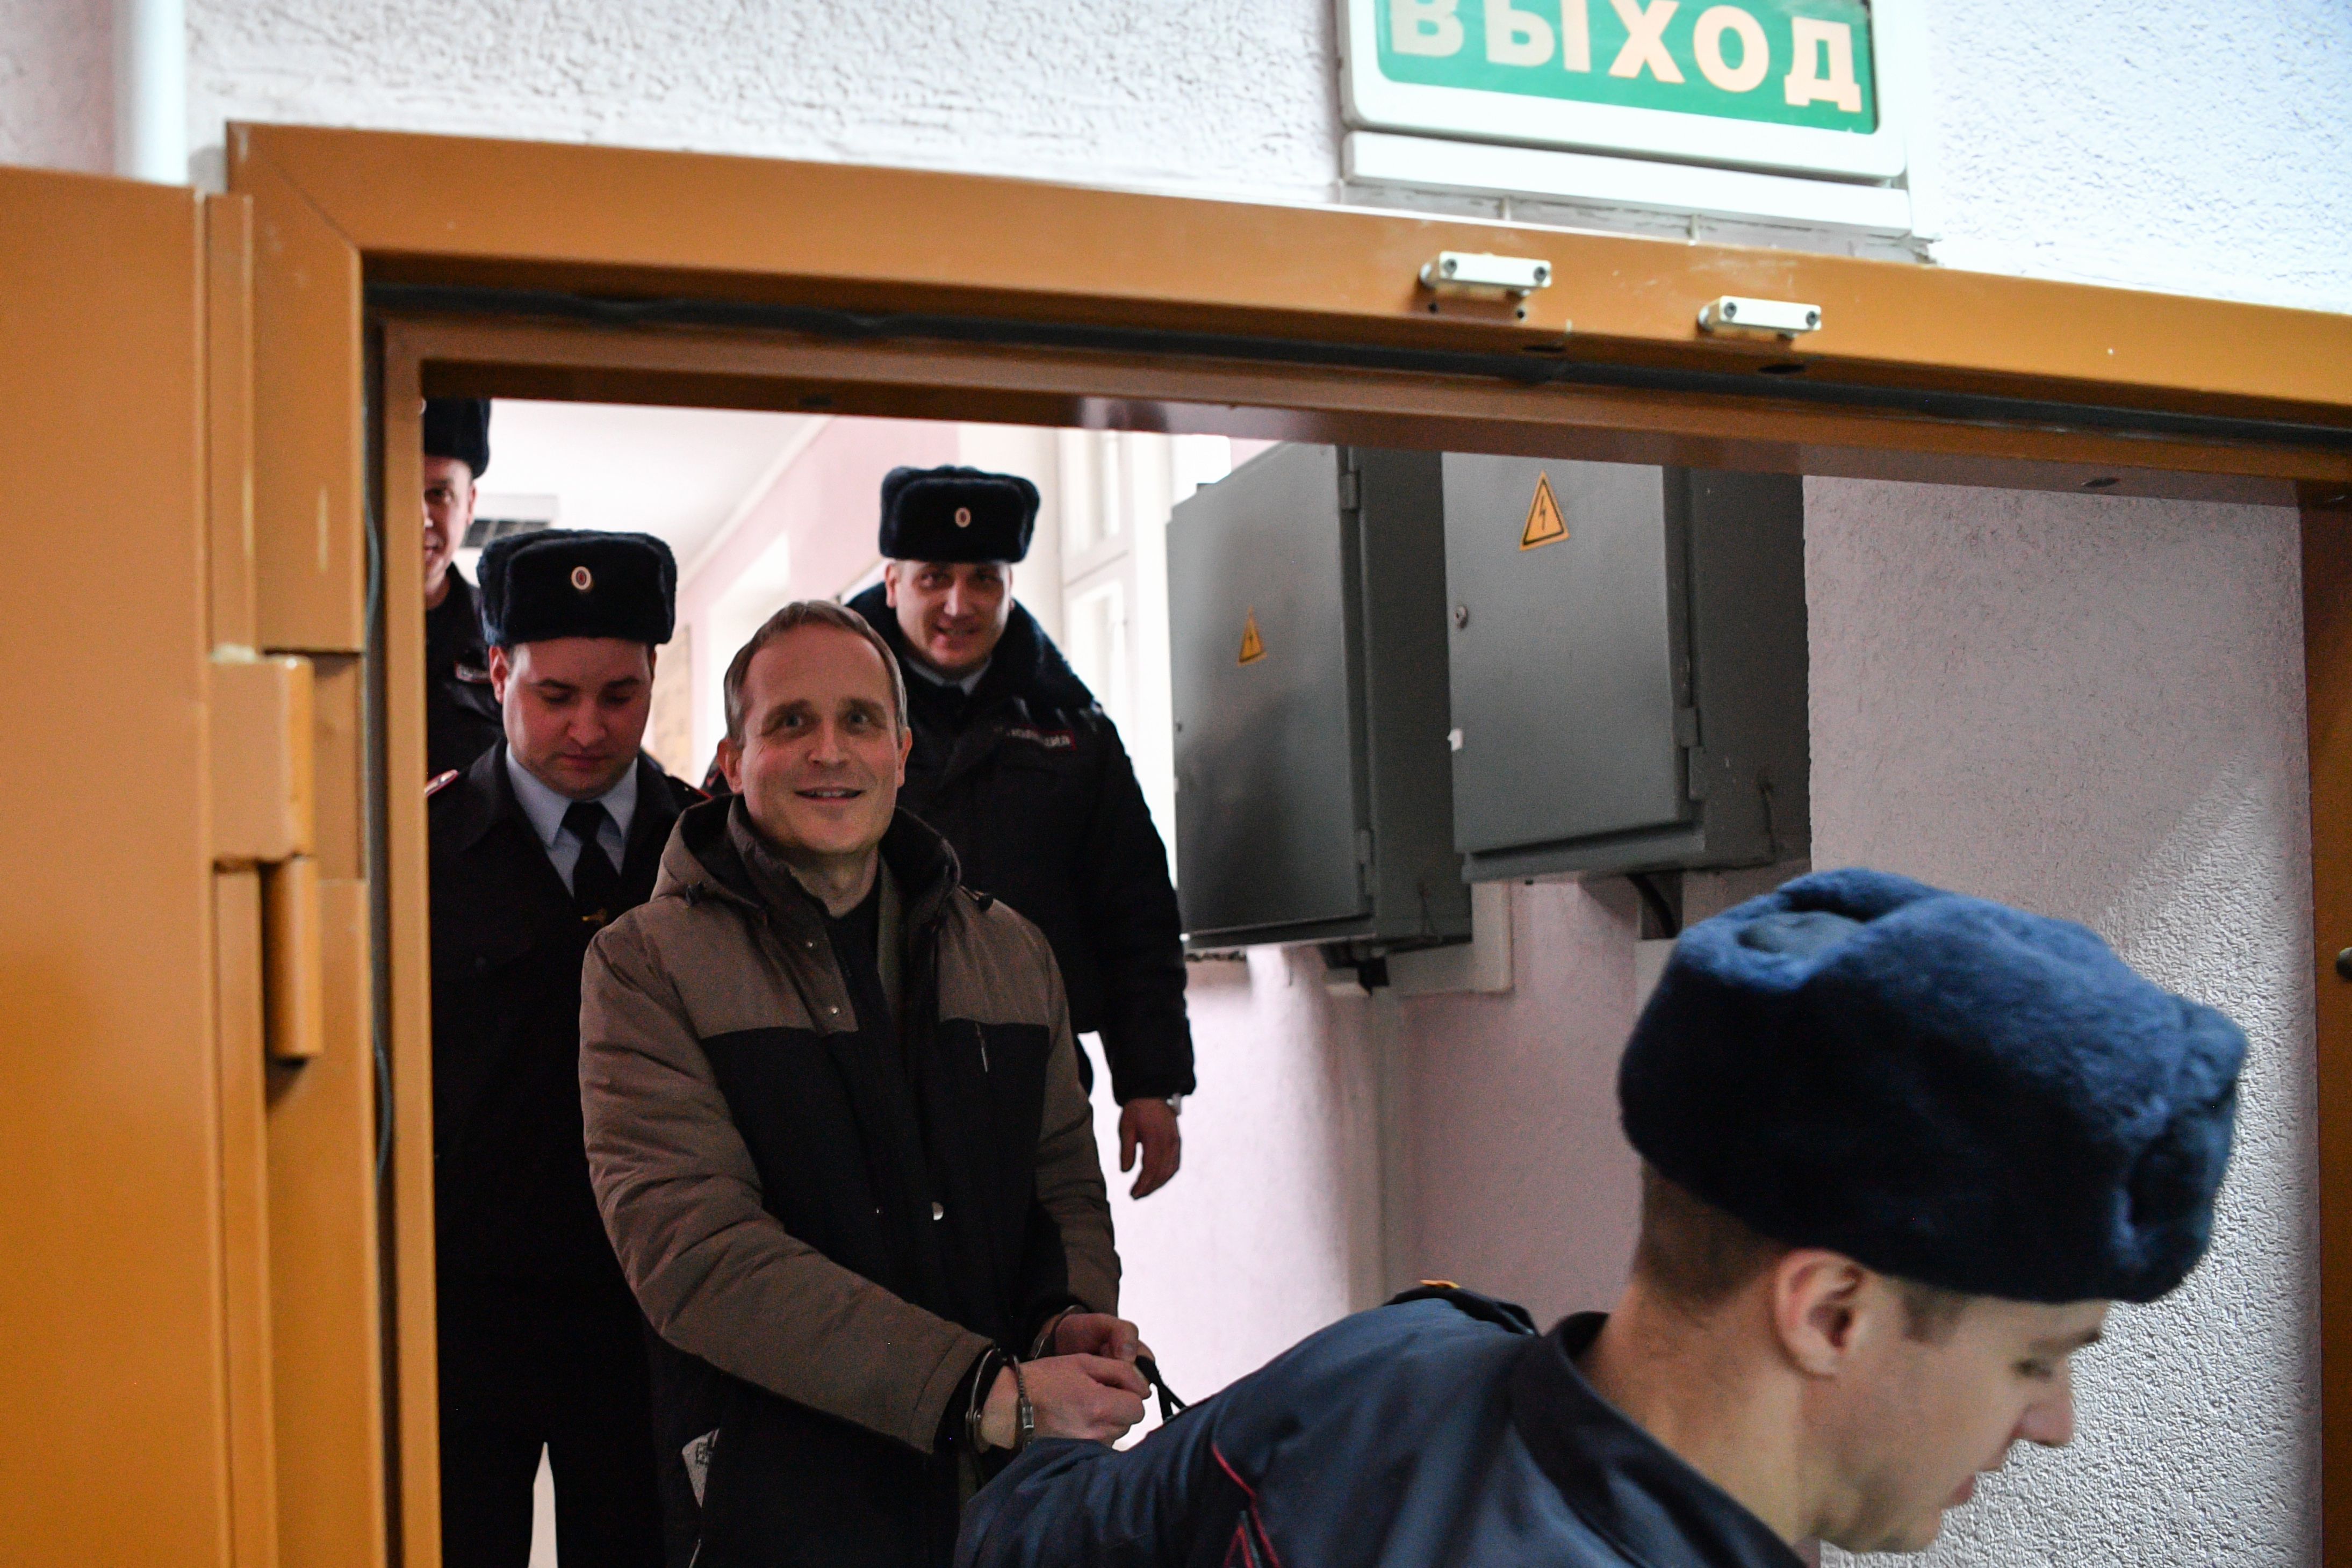 Dennis Christensen is escorted inside a courthouse following the verdict announcement in the town of Oryol on February 6, 2019 (MLADEN ANTONOV/AFP via Getty Images)